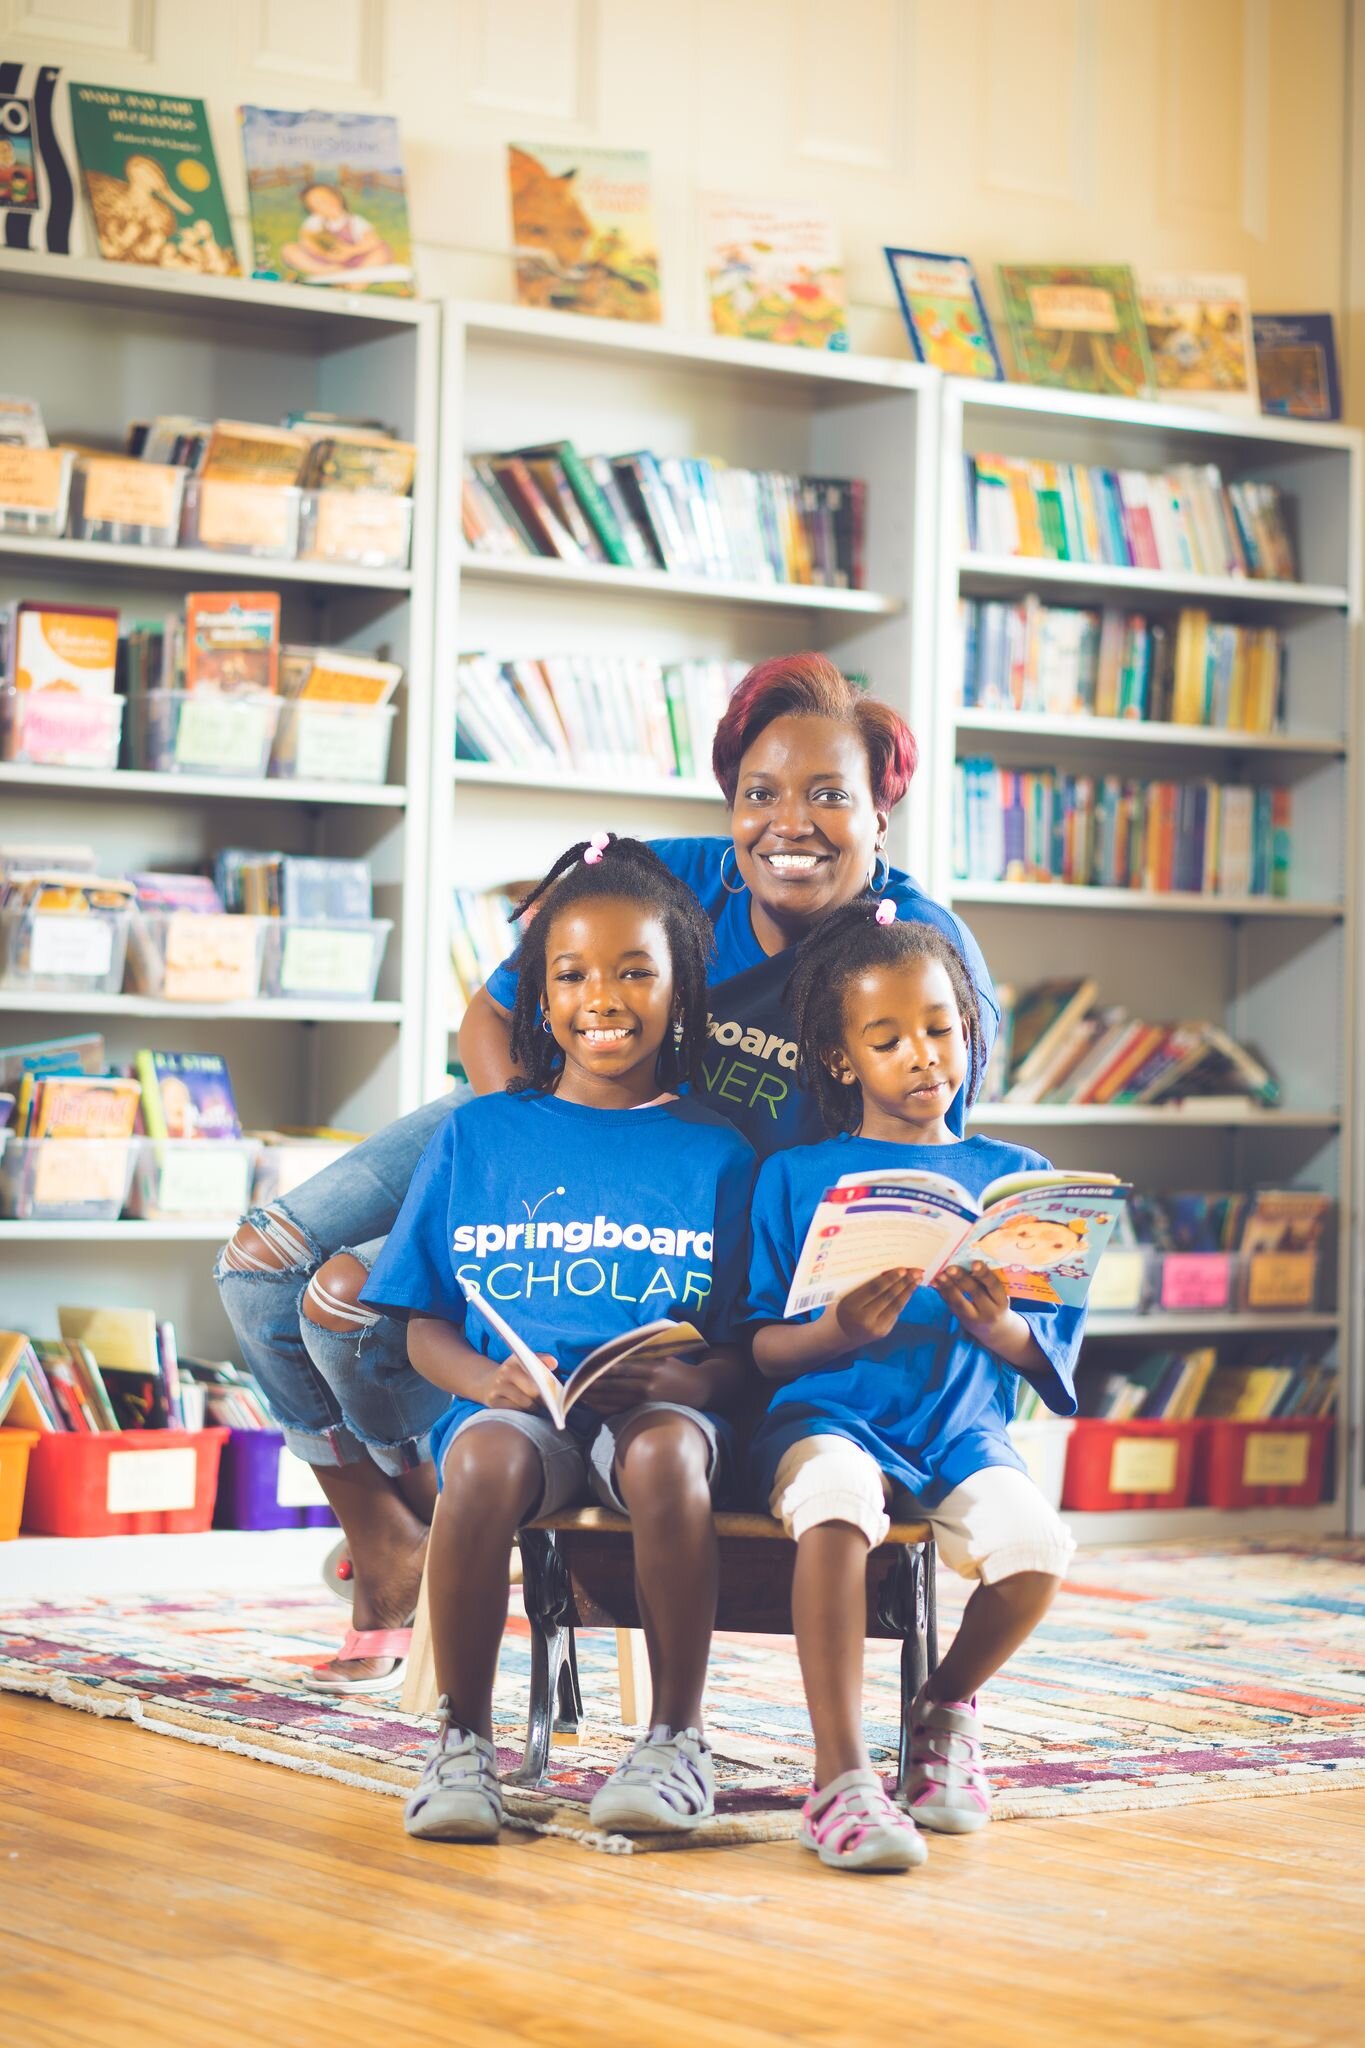 woman posing behind two children reading books with springboard scholars tee shirts, in a library